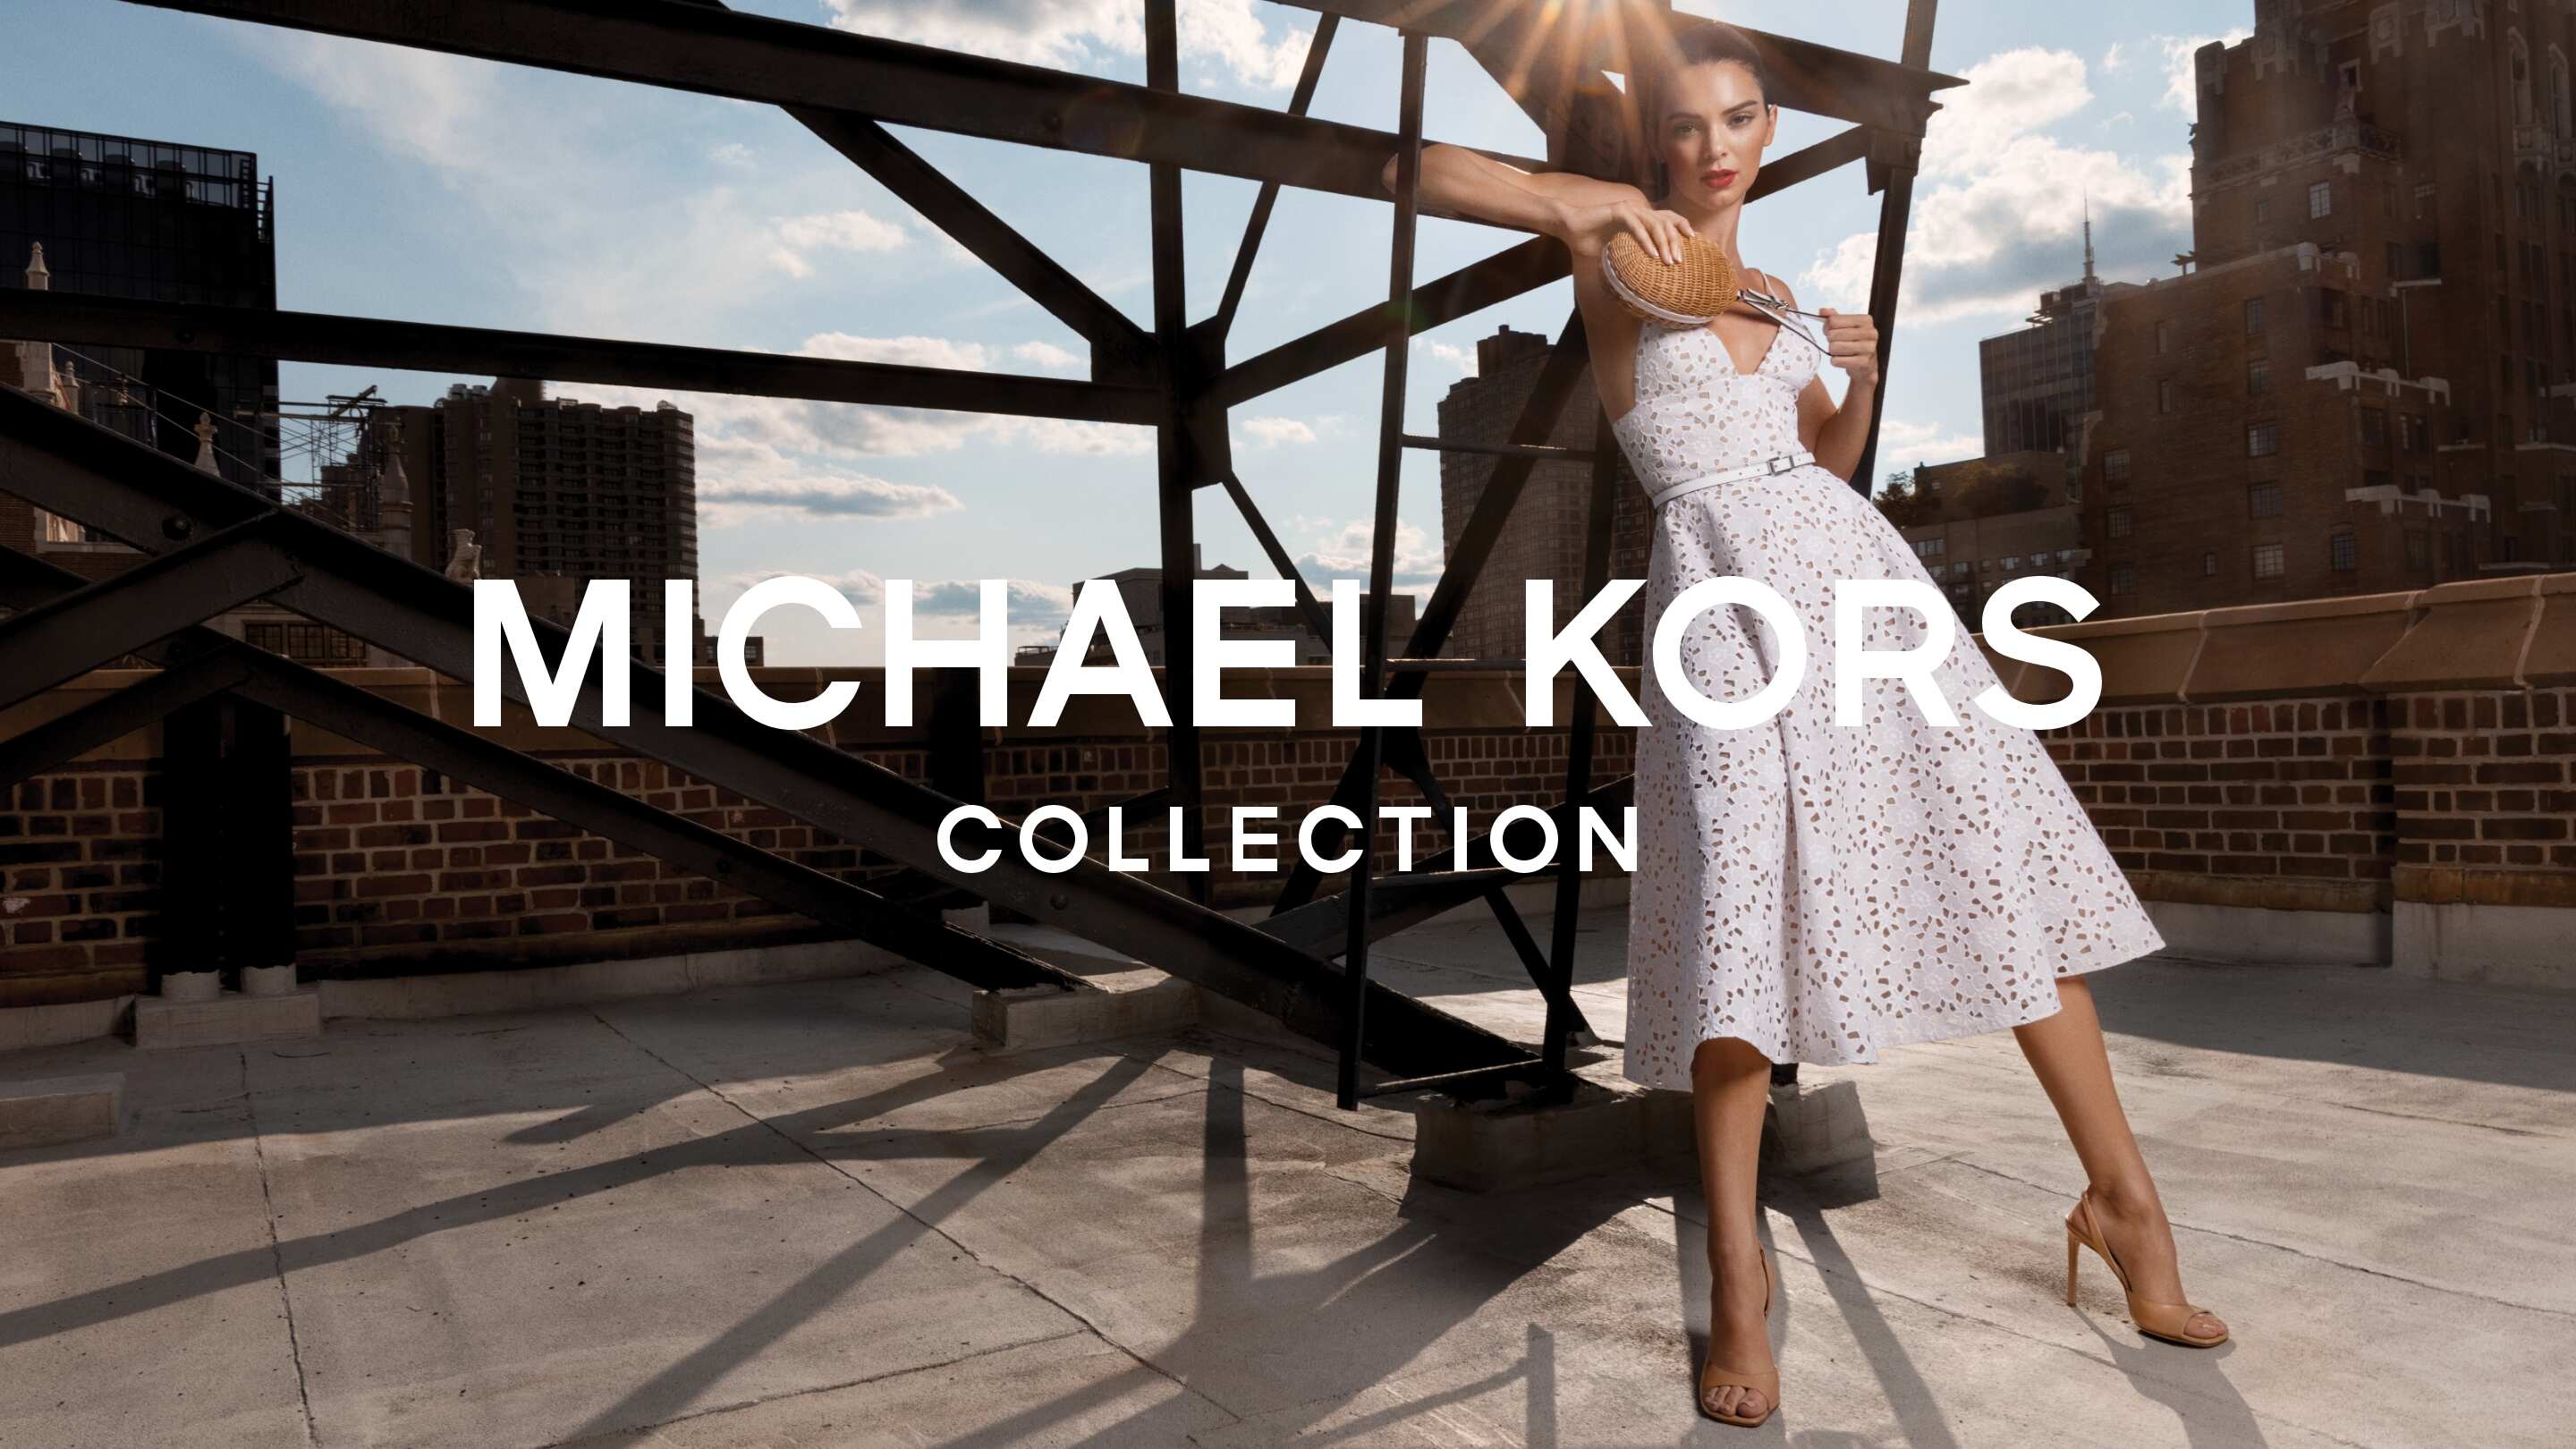 Michael Kors Spring/Summer 2022 Collection